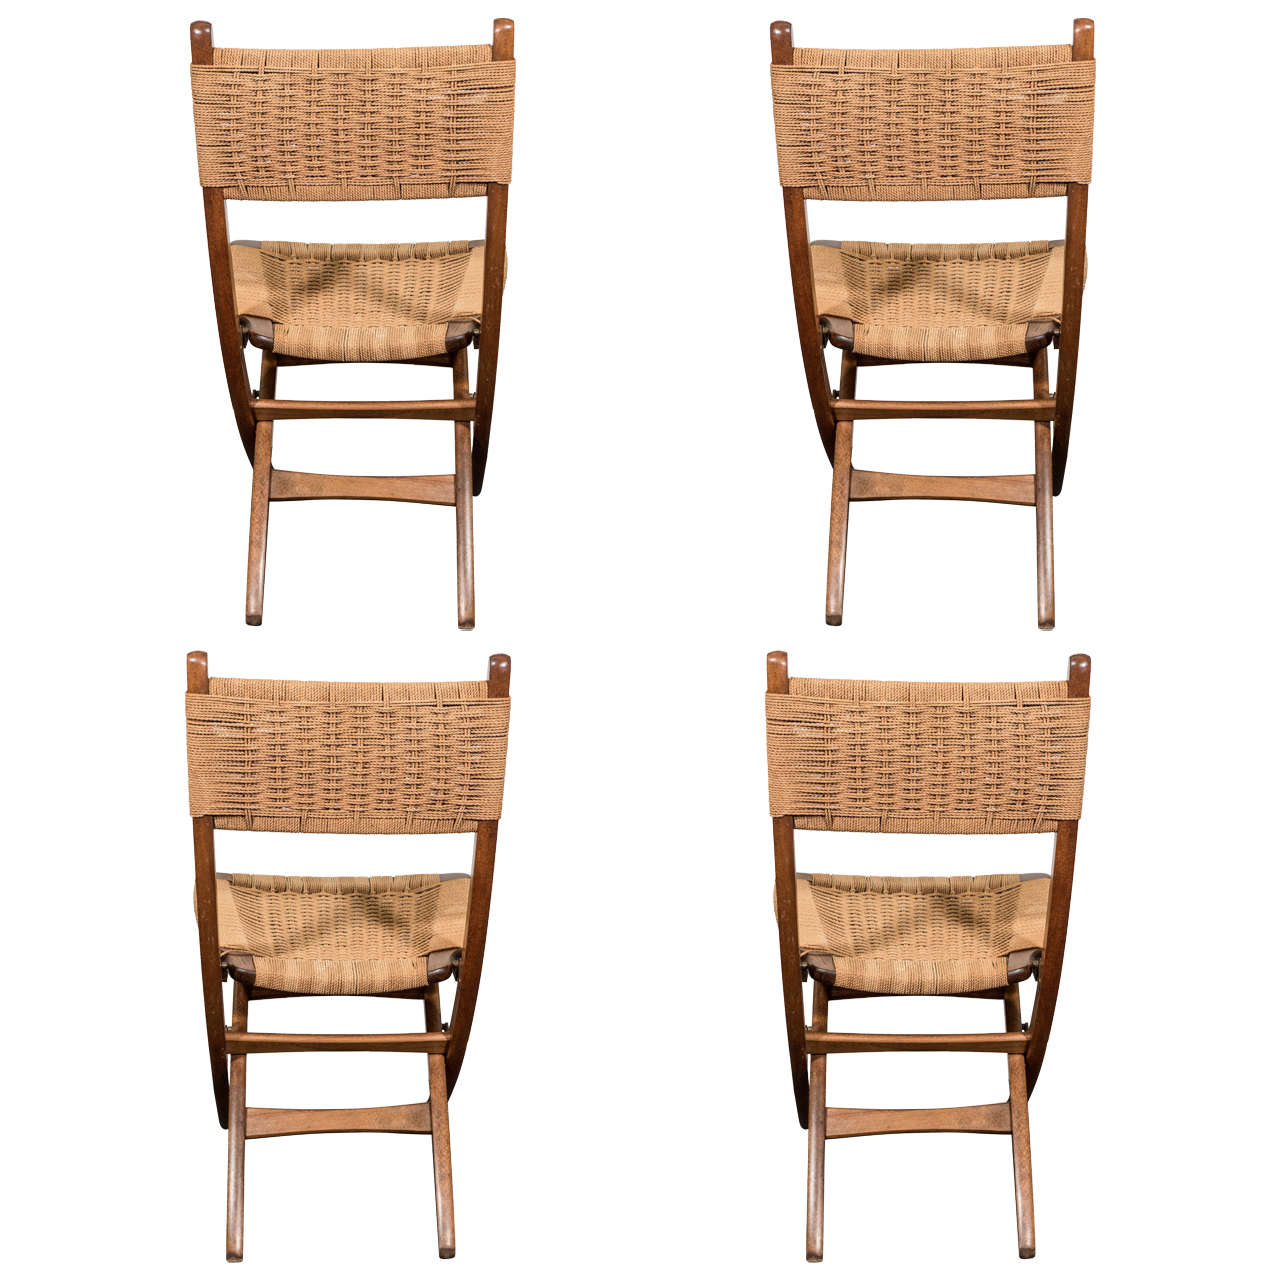 A vintage set of four folding chairs in the Scandinavian Modern style and inspired by designer Hans Wegner, with braided paper-cord backs and seating against wooden Campaign frames on X-form legs. Markings include stamp [Yugoslavia]. Good vintage